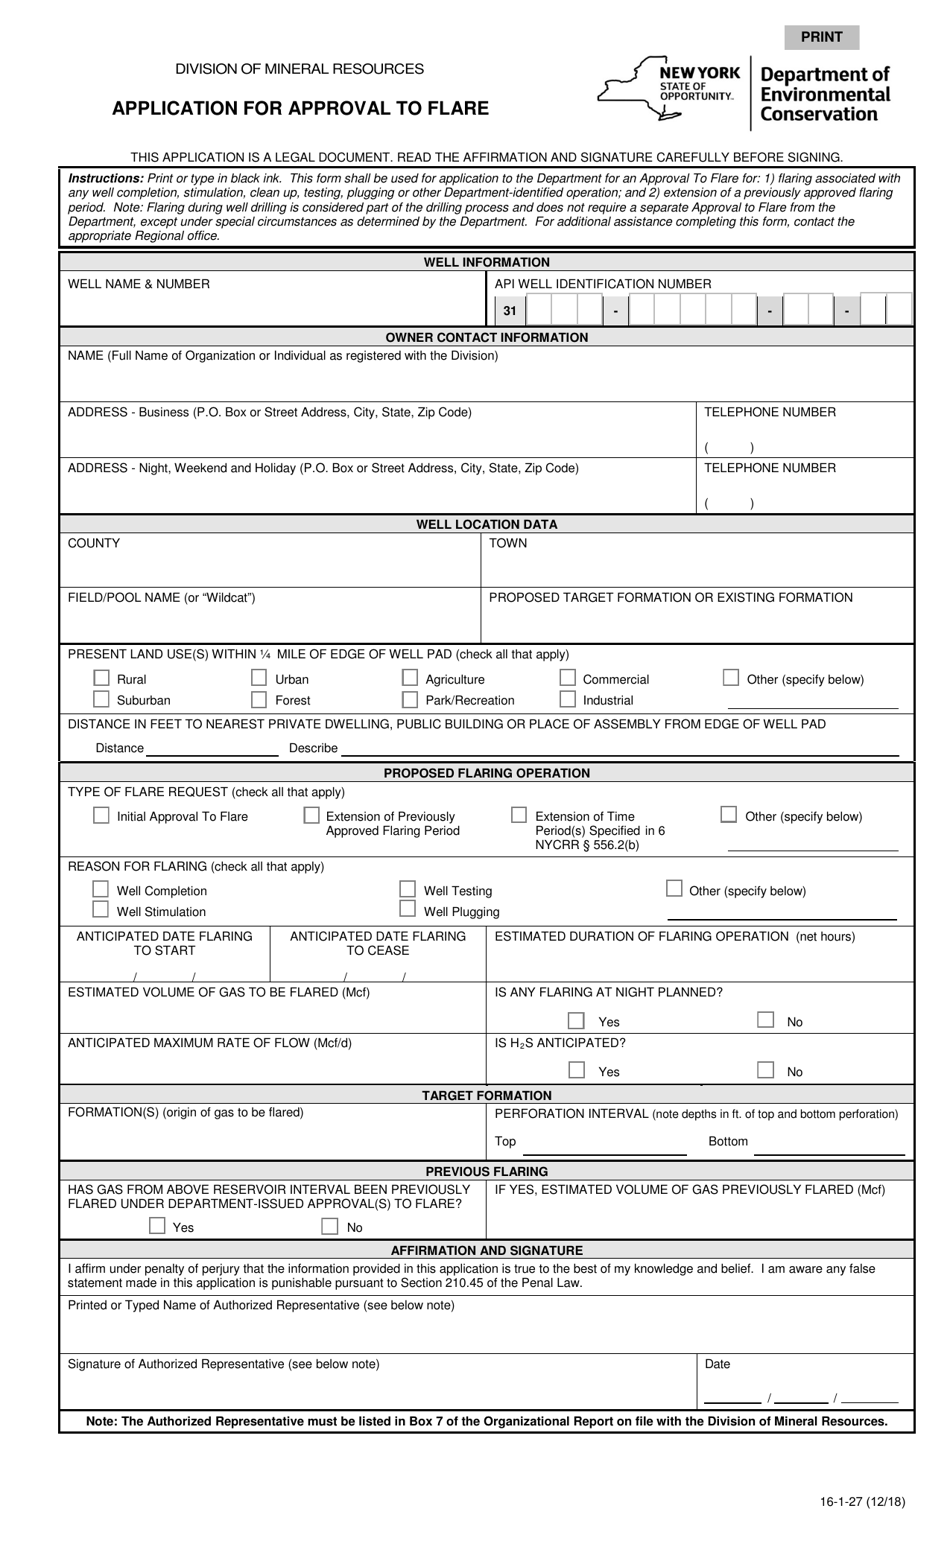 Form 16-1-27 Application for Approval to Flare - New York, Page 1